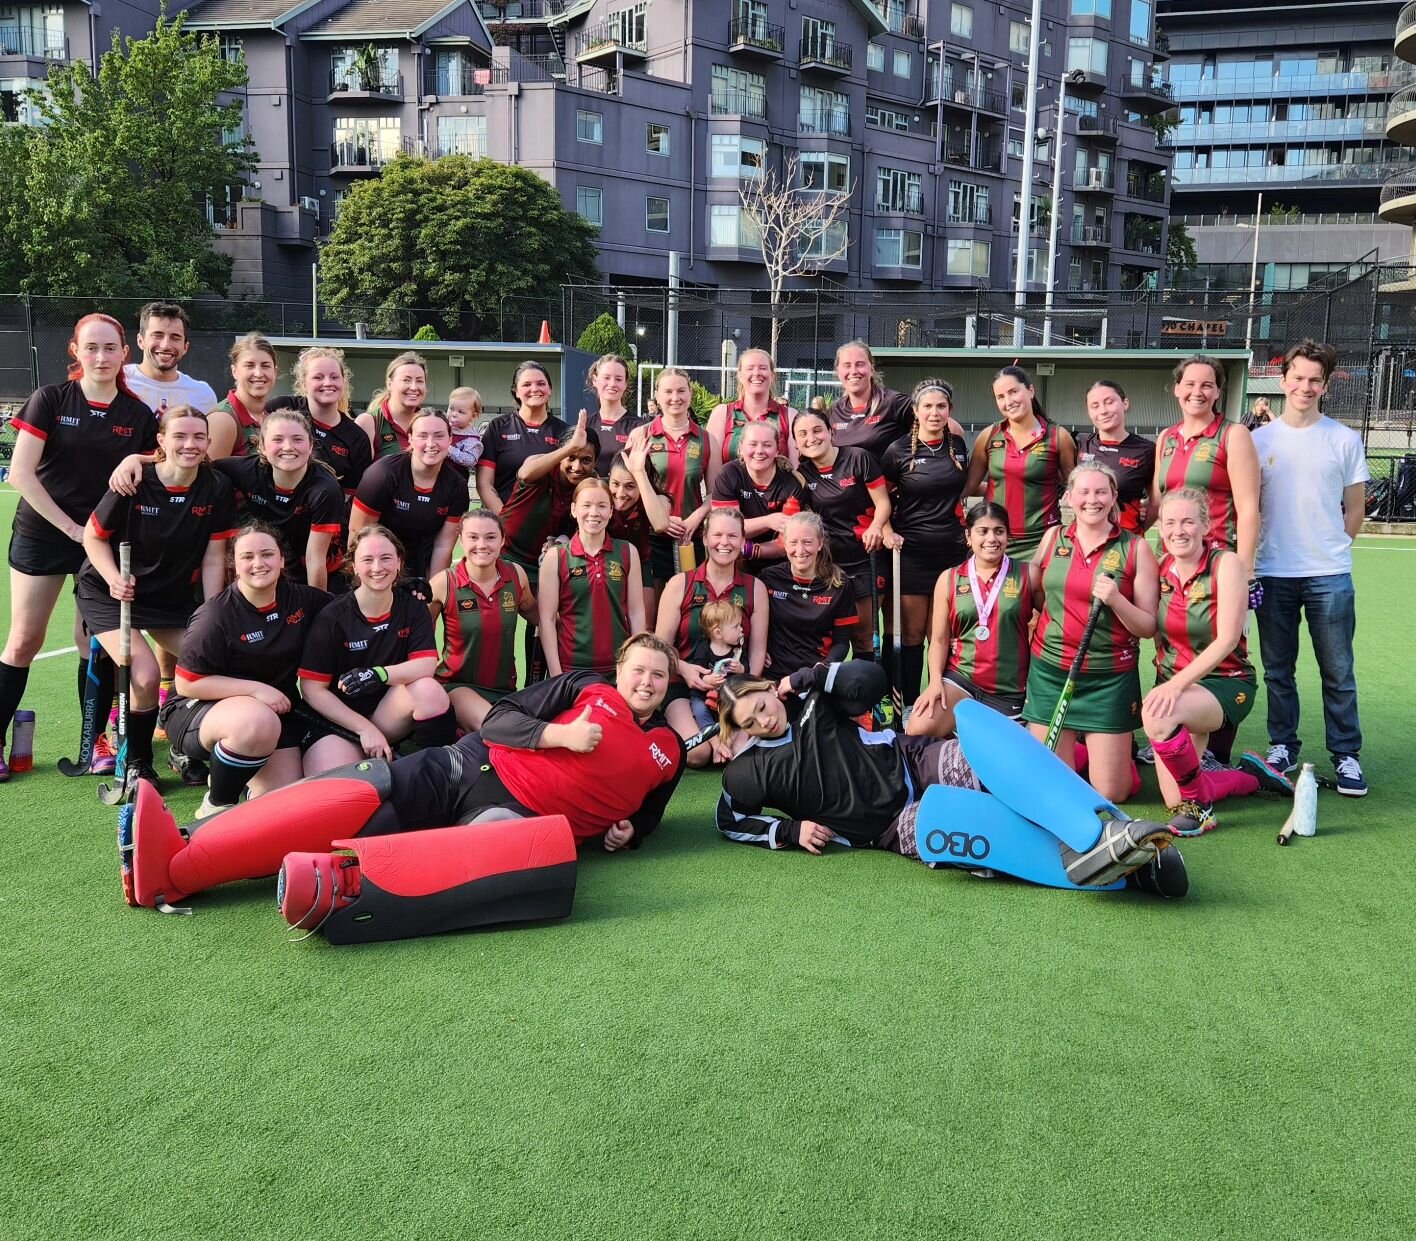 Womens Round 2023 💗
MHSOB HC celebrated the wonderful women in our hockey community by wearing pink socks and pink ribbons 🎀 

Round 5 results: 
🏑 Womens VL2 lost 1-3 
🏑 Womens Metro East won 5-0 

Congratulations to Anesha Parsot, who during her